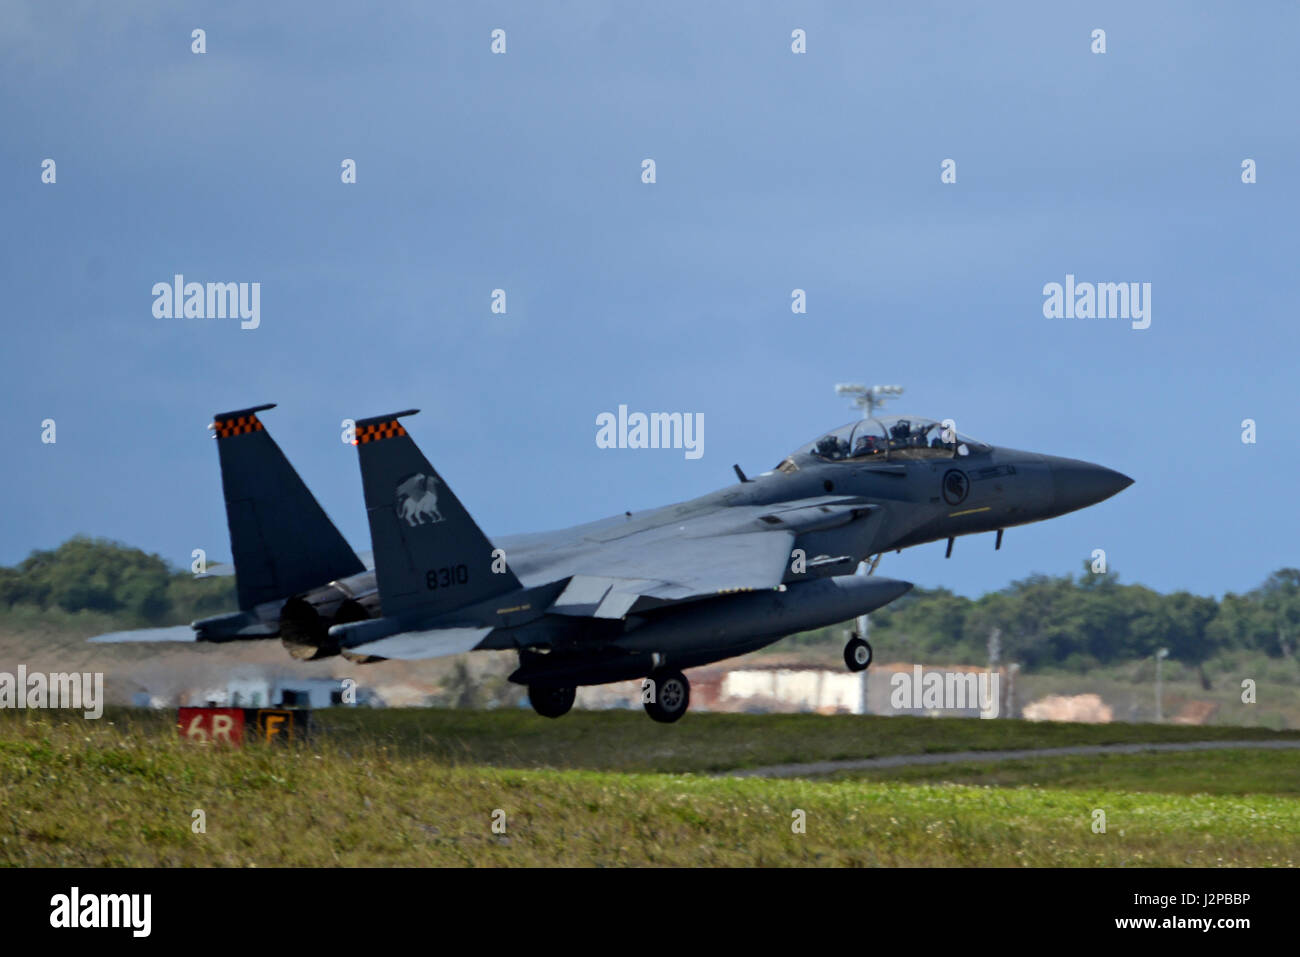 A Republic of Singapore Air Force F-15SG aircraft lands April 10, 2017, at Andersen Air Force Base, Guam. The RSAF deployed to this U.S. Air Force base to conduct quality bilateral training for aircrew and maintenance personnel to sharpen their skills and strengthen ties with partners in the Pacific. (U.S. Air Force Airman 1st Class Gerald R. Willis/Released) Stock Photo